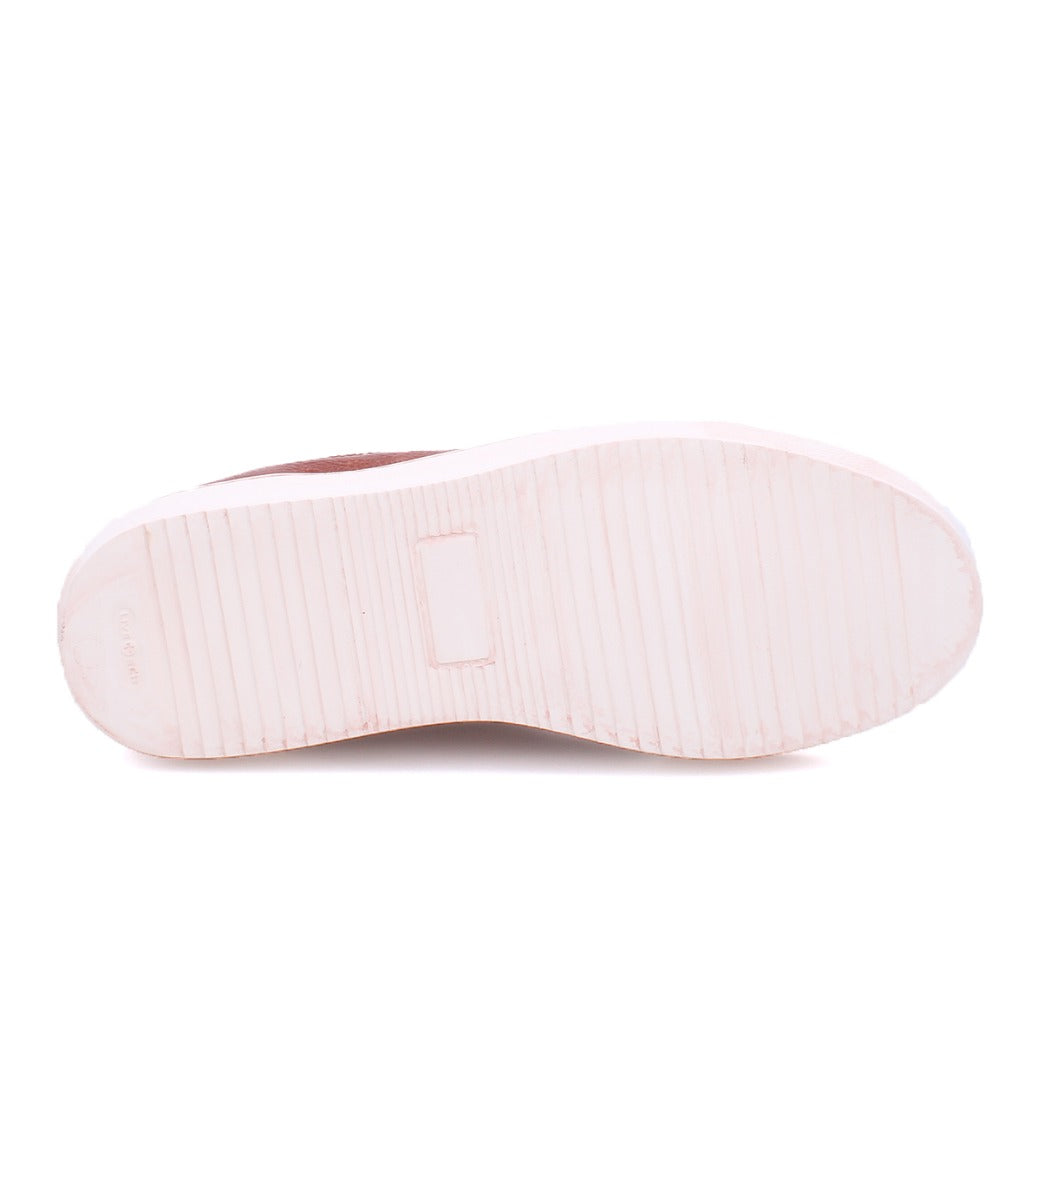 A pair of Rossela shoes with a white sole and a pink sole, made by Bed Stu.